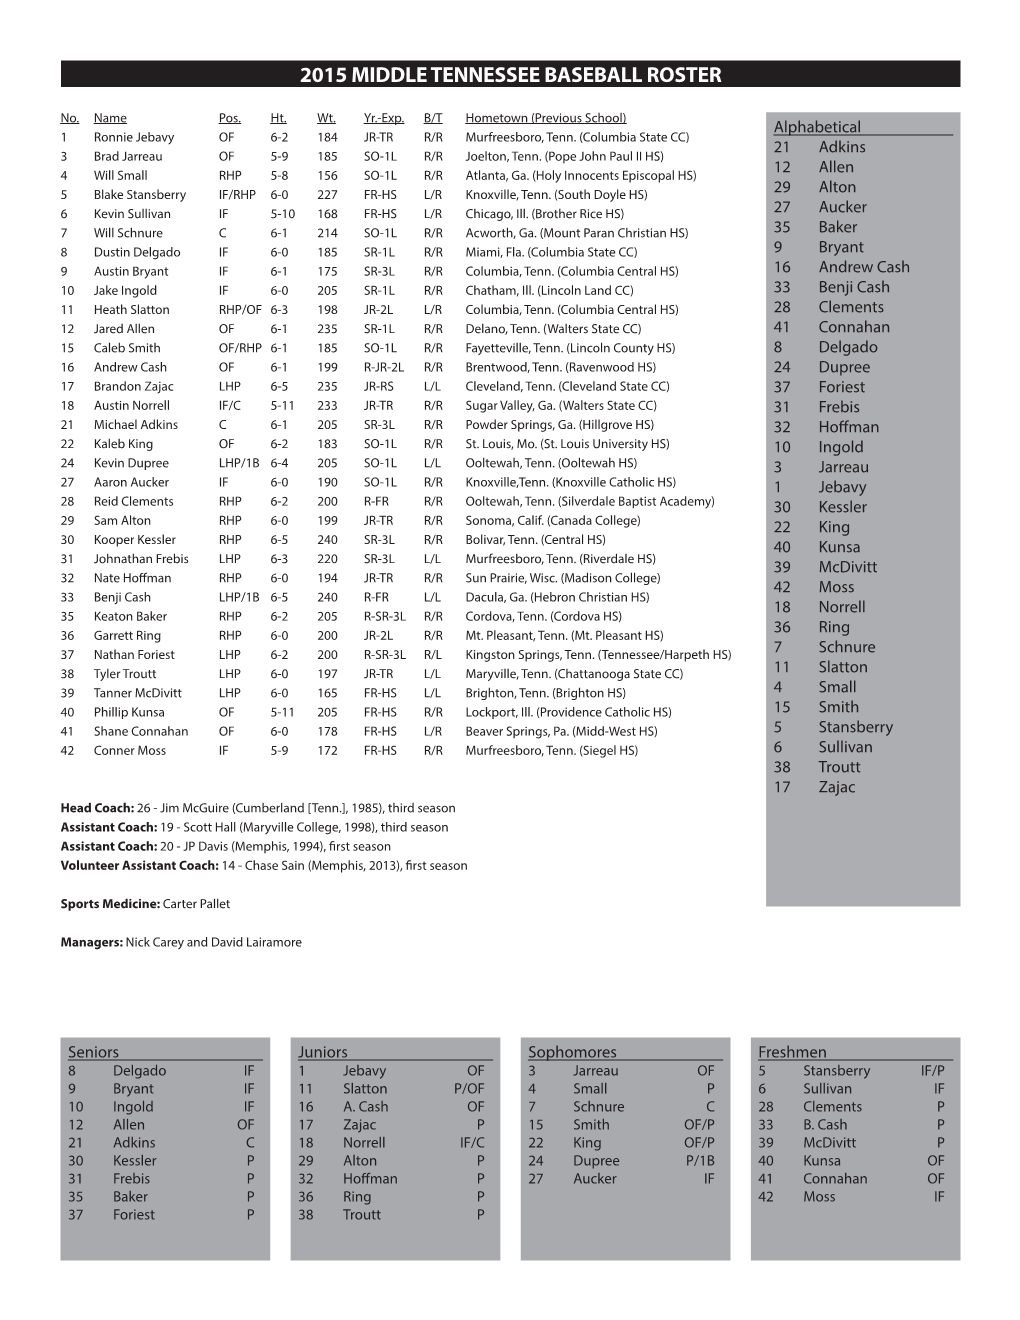 2015 Middle Tennessee Baseball Roster